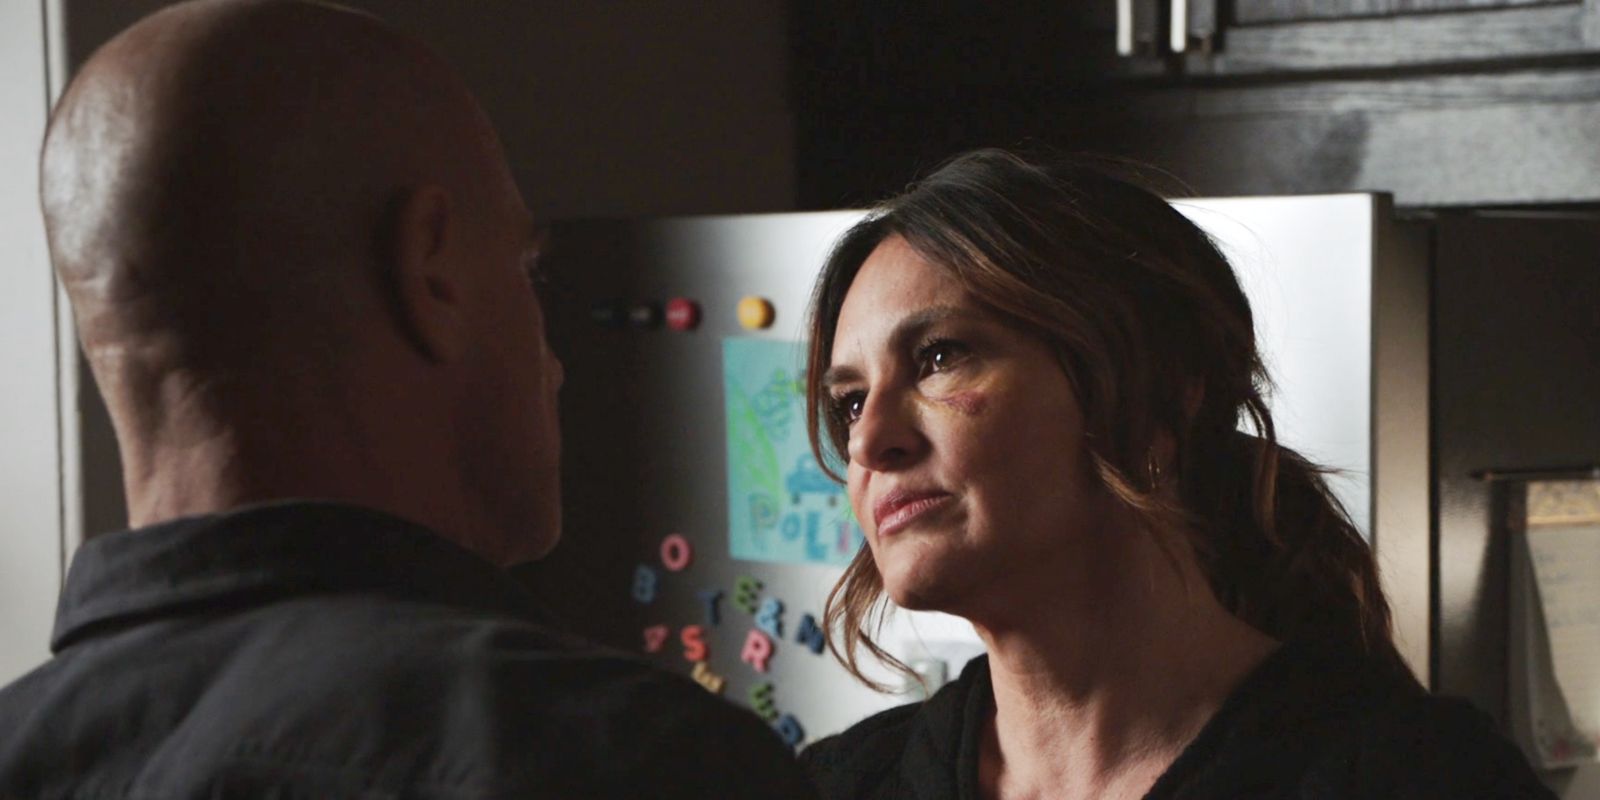 Benson and Stabler in Law & Order: SVU